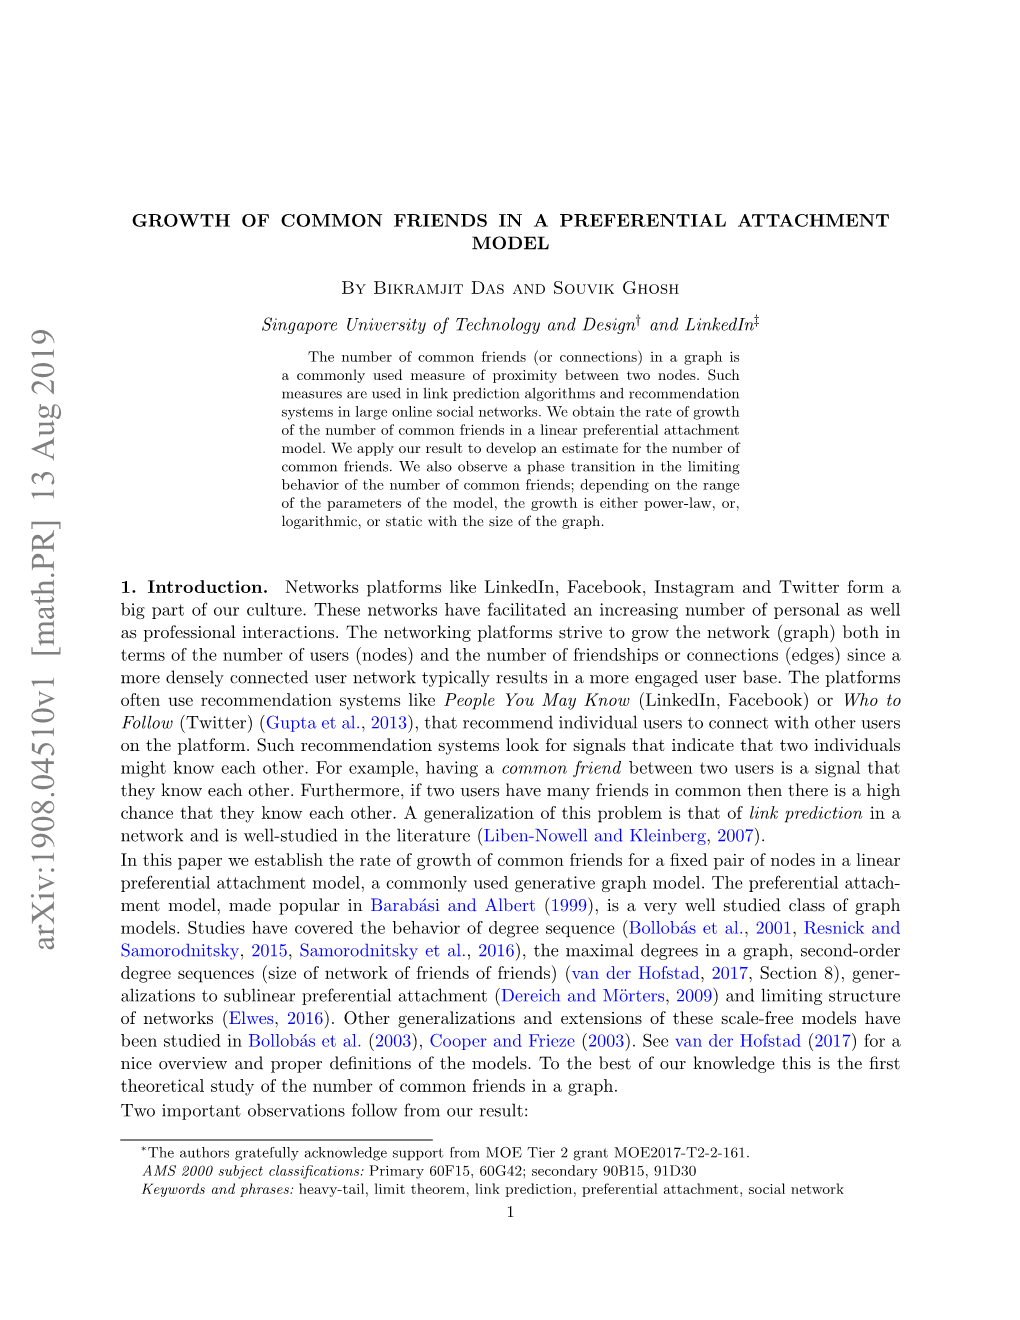 Growth of Common Friends in a Preferential Attachment Model